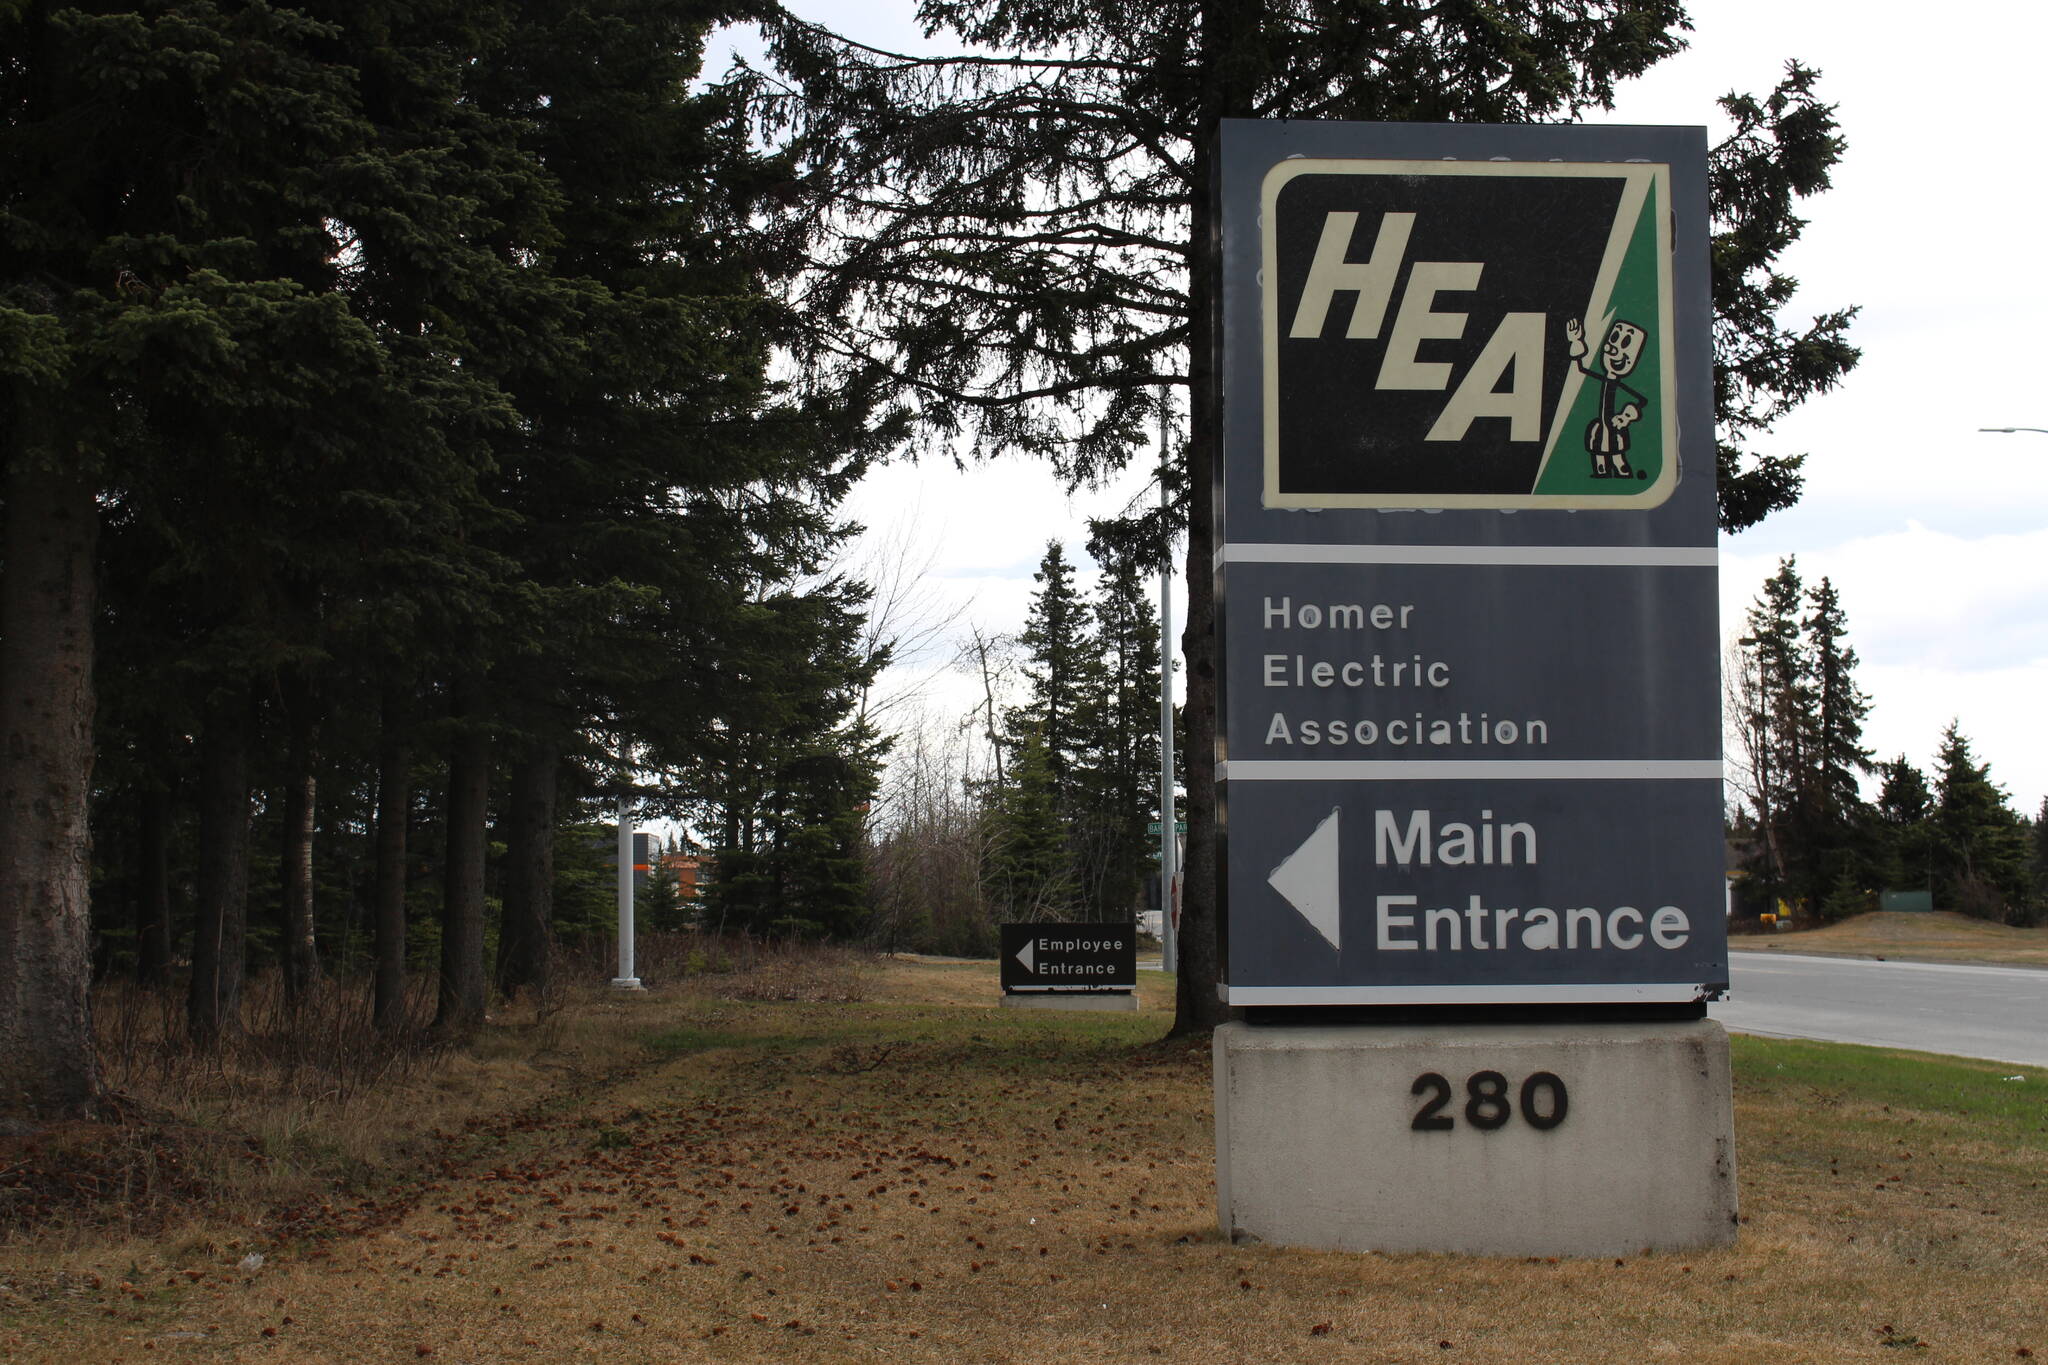 The entrance to the Homer Electric Association office is seen here in Kenai, Alaska, on May 7, 2020. (Peninsula Clarion file)